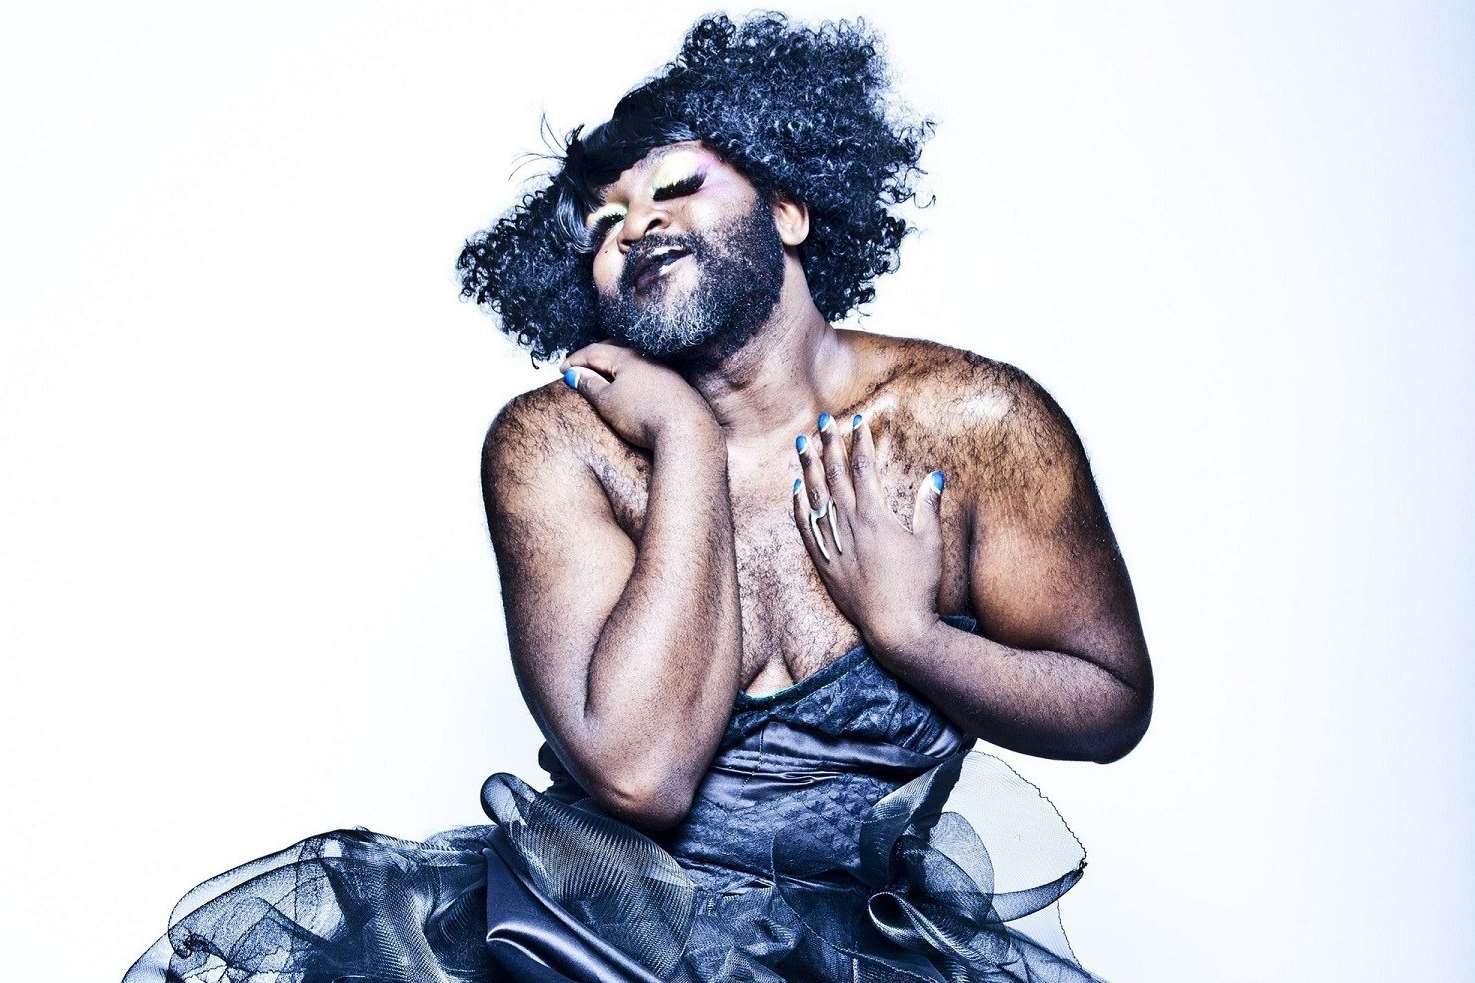 Cabaret superstar and baritone extraordinaire Le Gateau Chocolat is performing at the 2017 Canterbury Festival